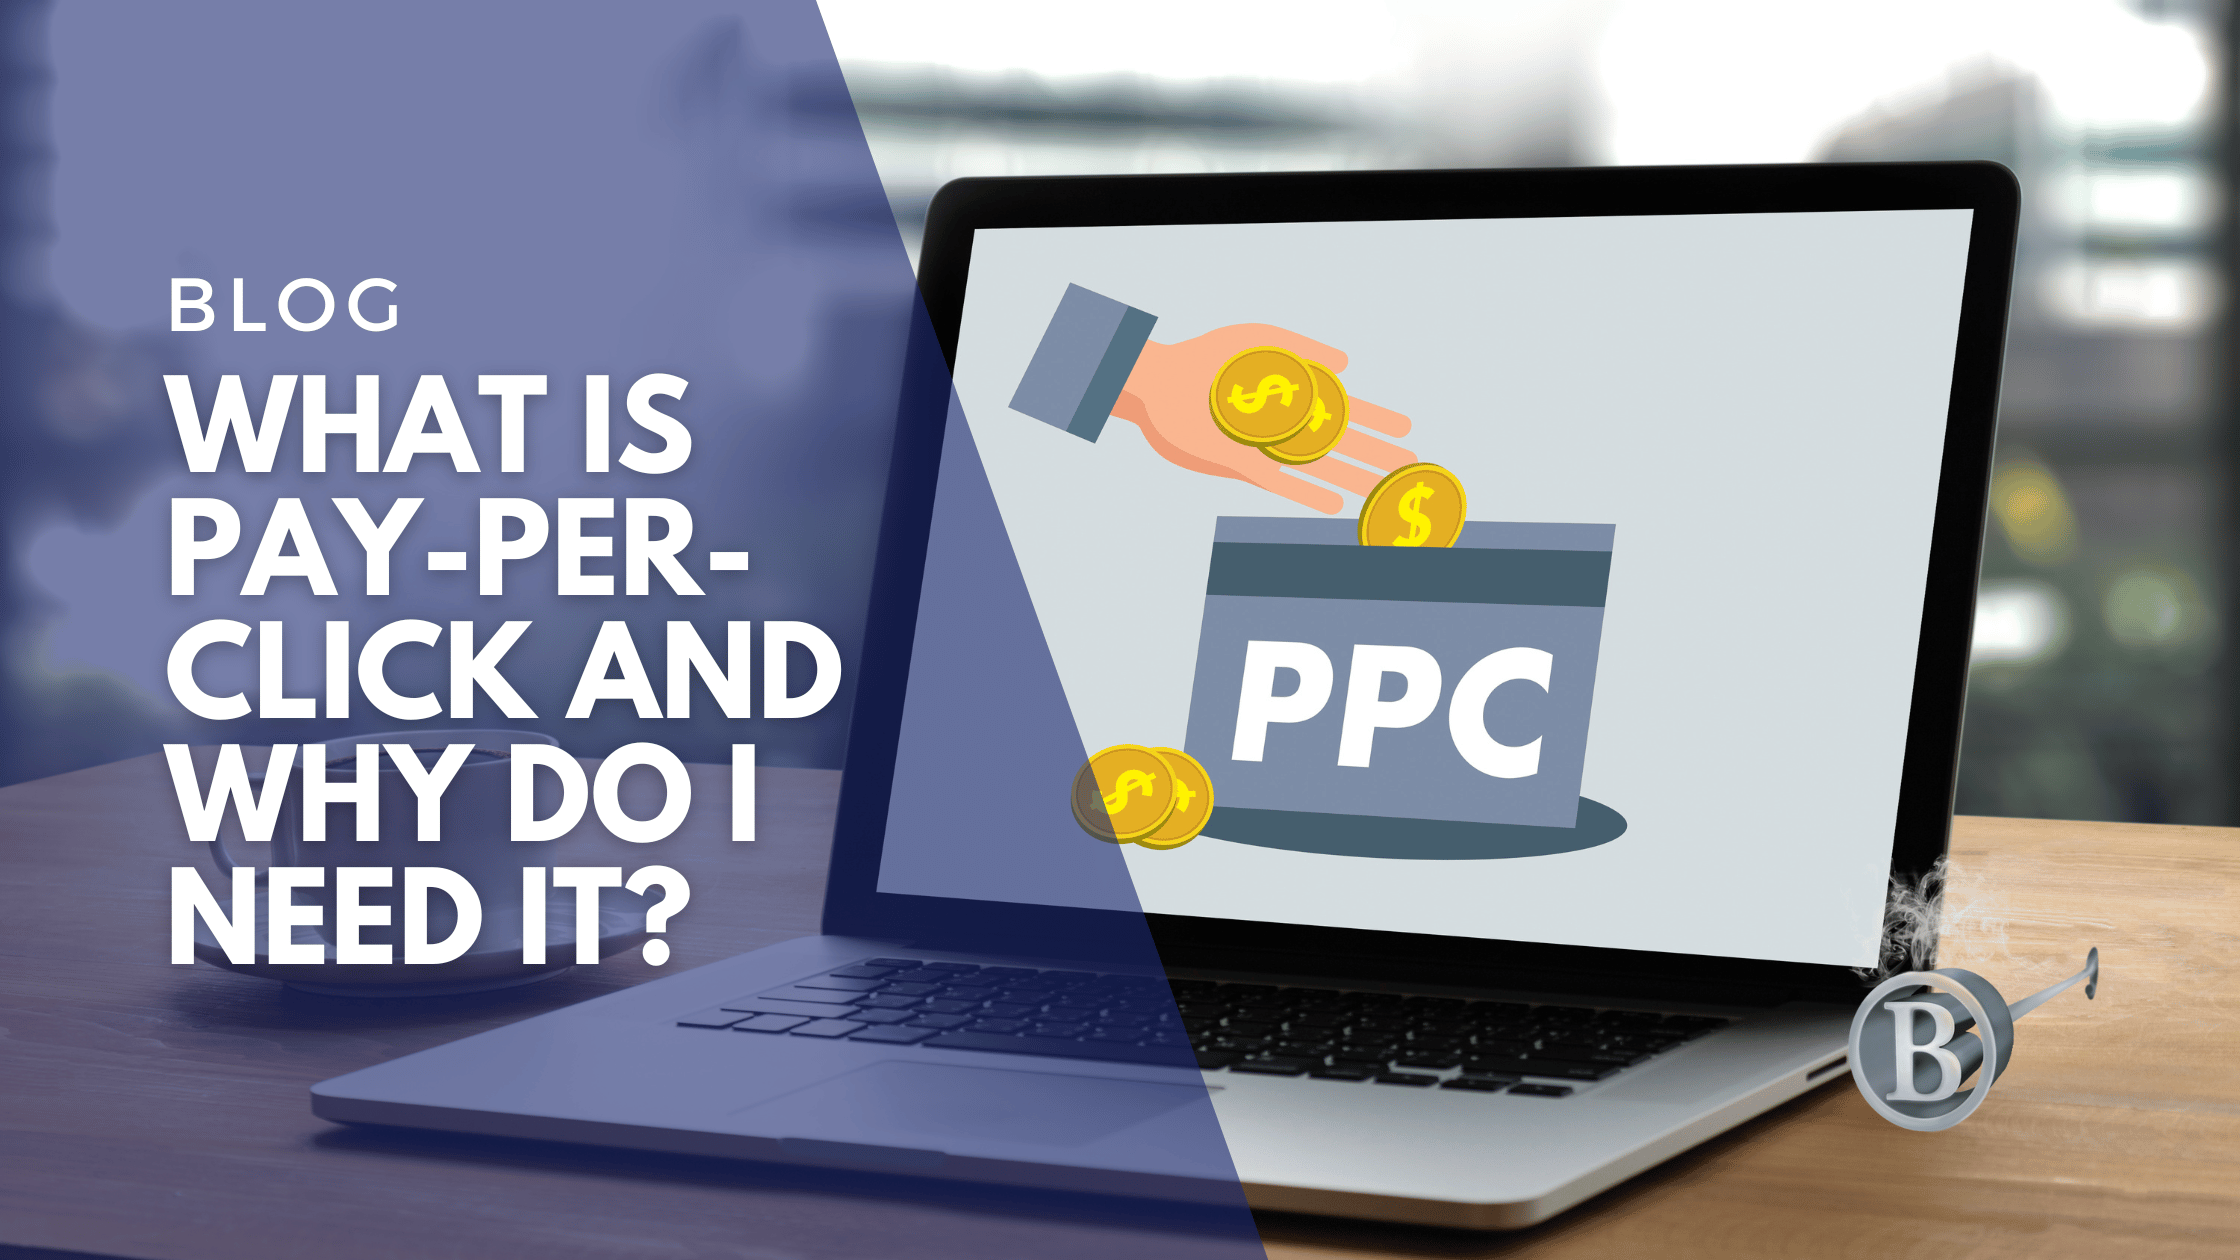 What is Pay-Per-Click and Why Do I Need it?